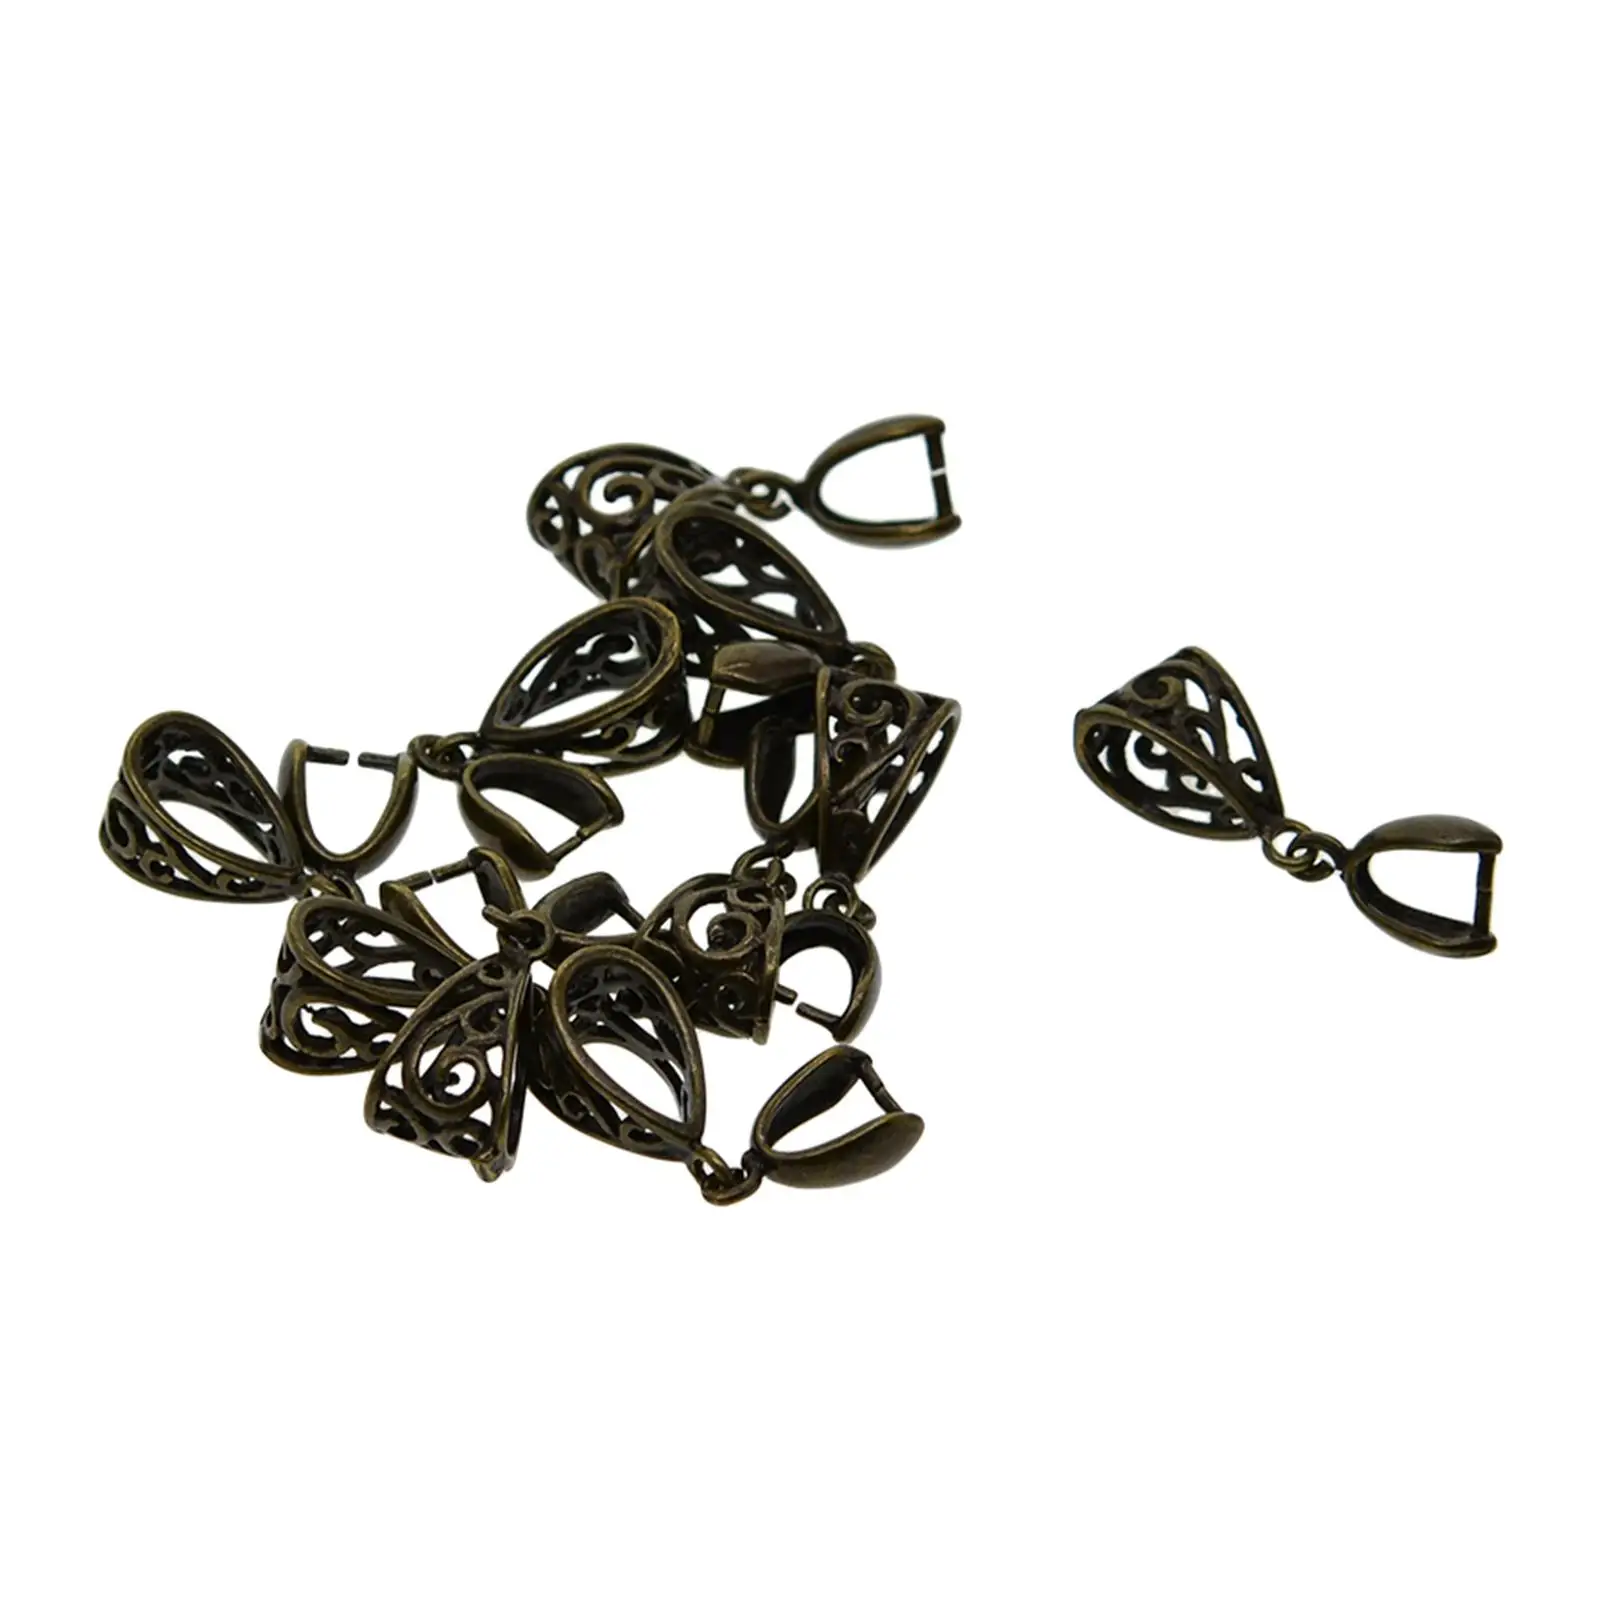 10x Bronze Pinch Bails Beads Hanger  Clasps for Jewelry Making Buckles Charms Holder Necklace Bracelet Supplies